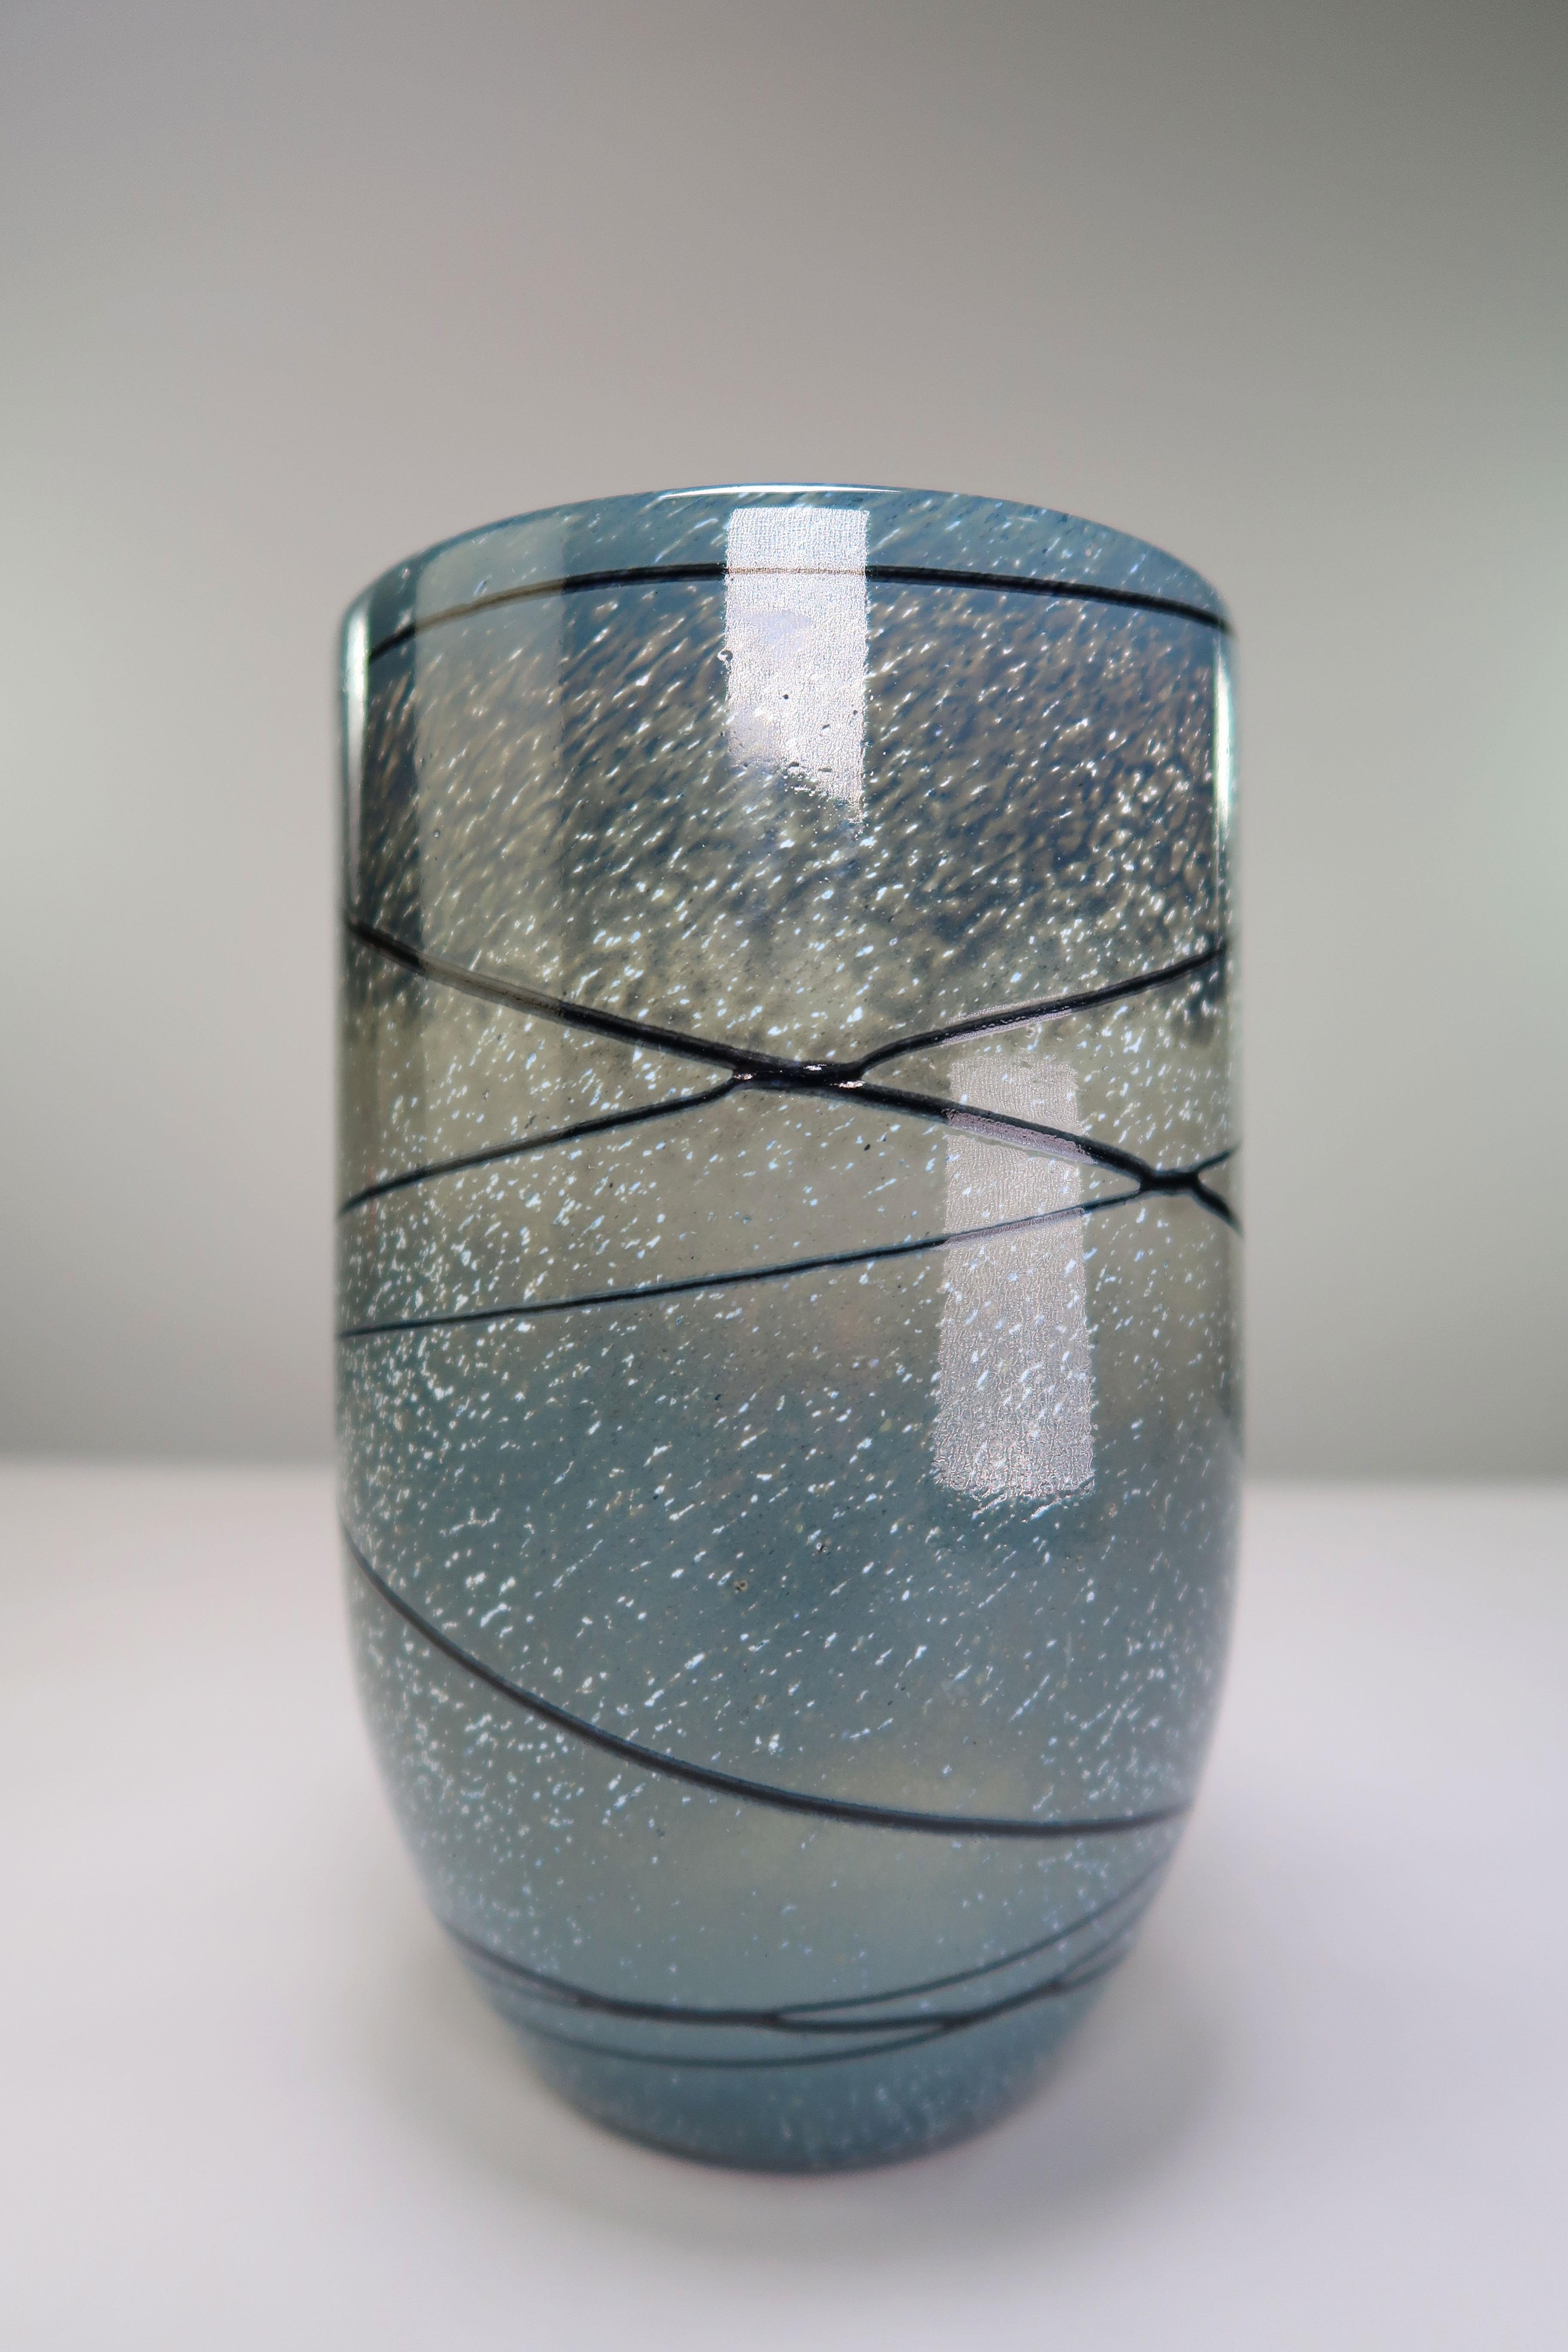 Vintage Finnish modernist crystal vase by designer Tuomo Heikkinen for Humppila Finland. Mould blown crystal glass. Blue and warm grey base with accents of white and light blue, black stripes and one red rectangular shaped figure on one side.